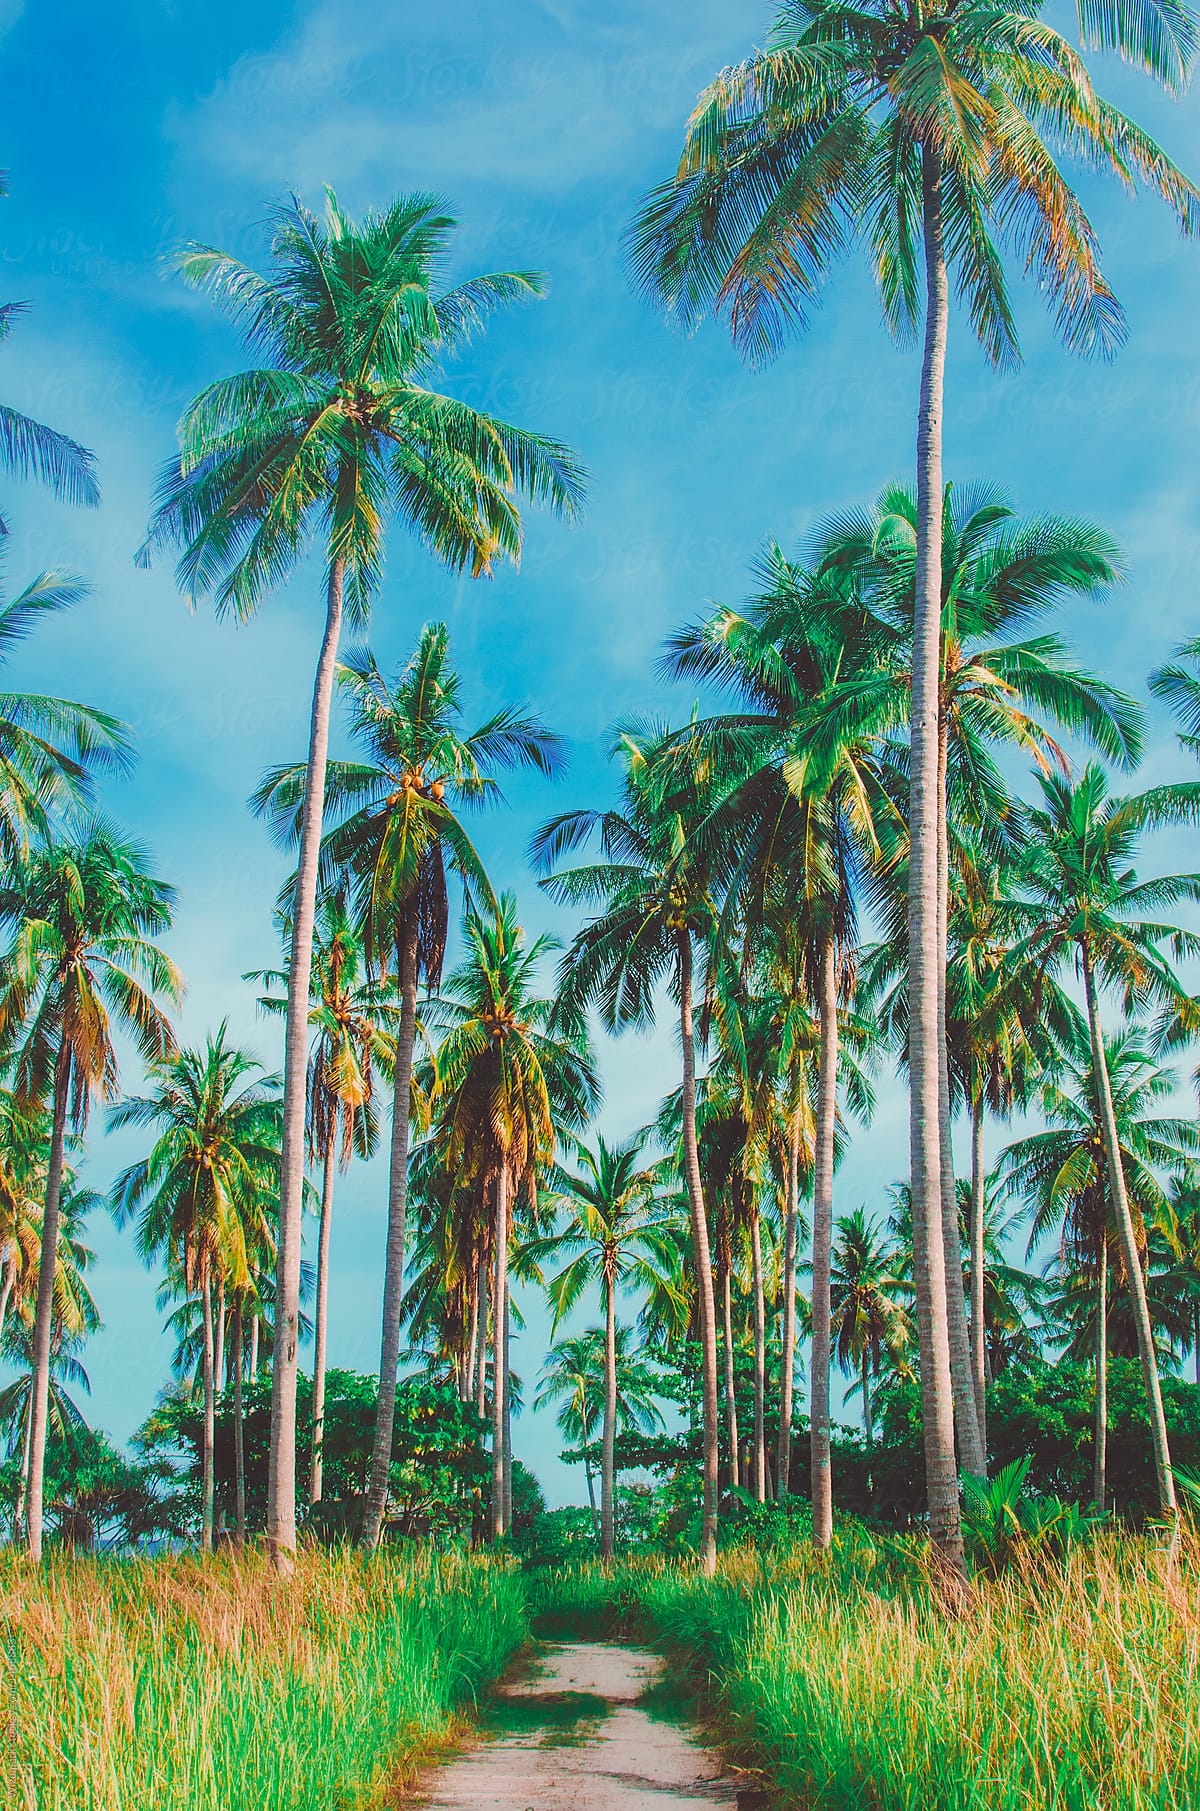 A lush island filled with tall palm trees